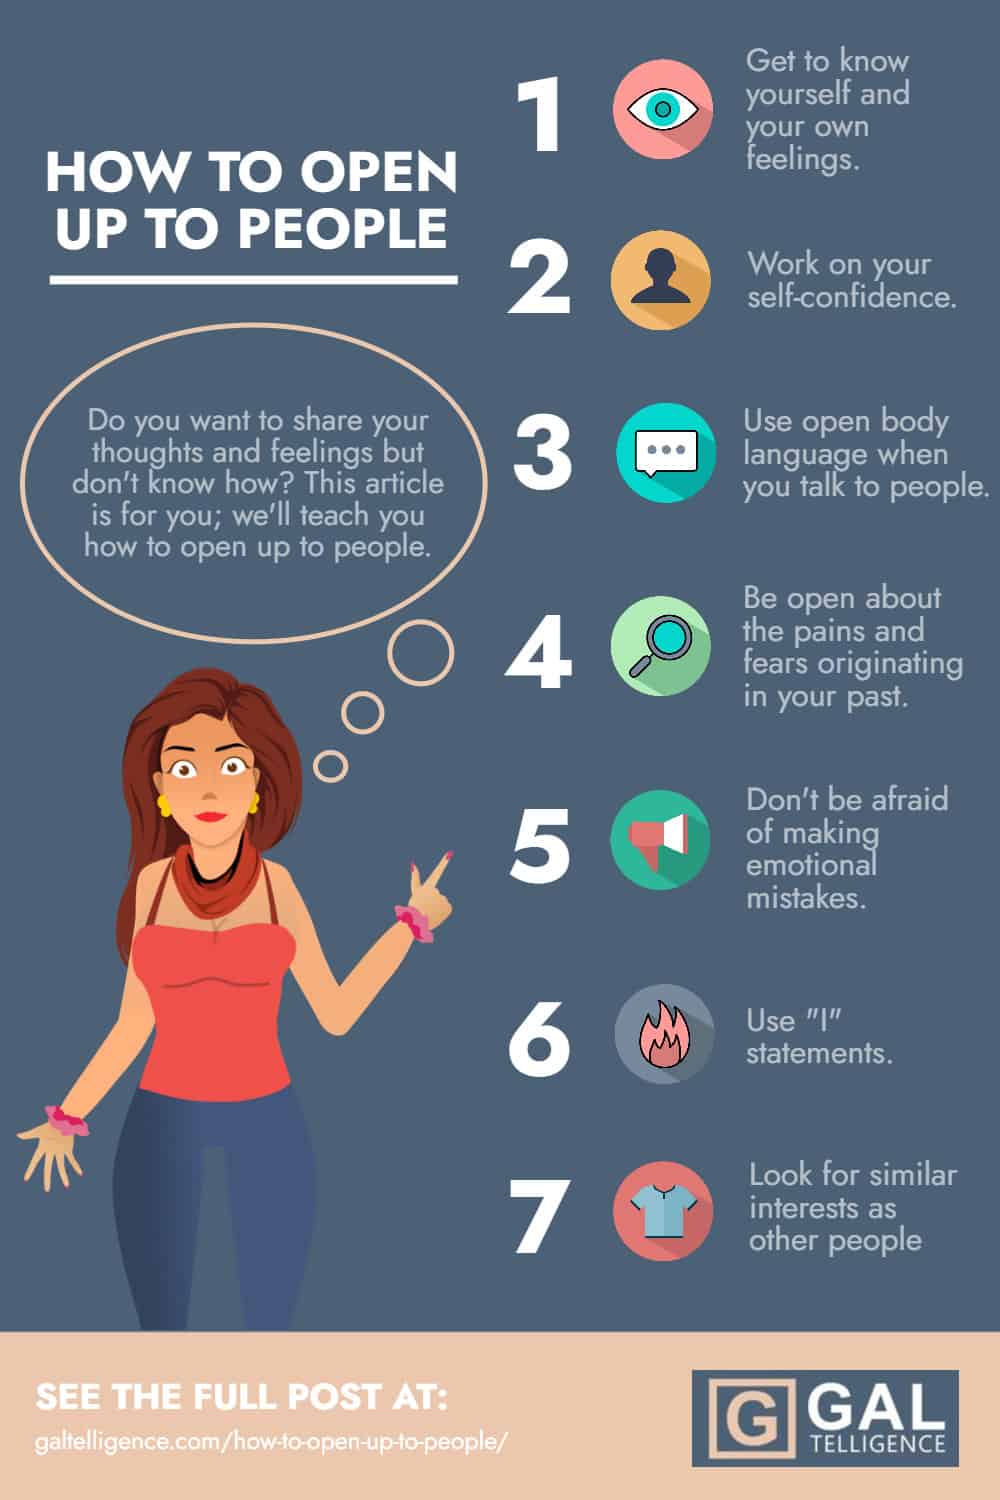 How to open up to people - Infographic